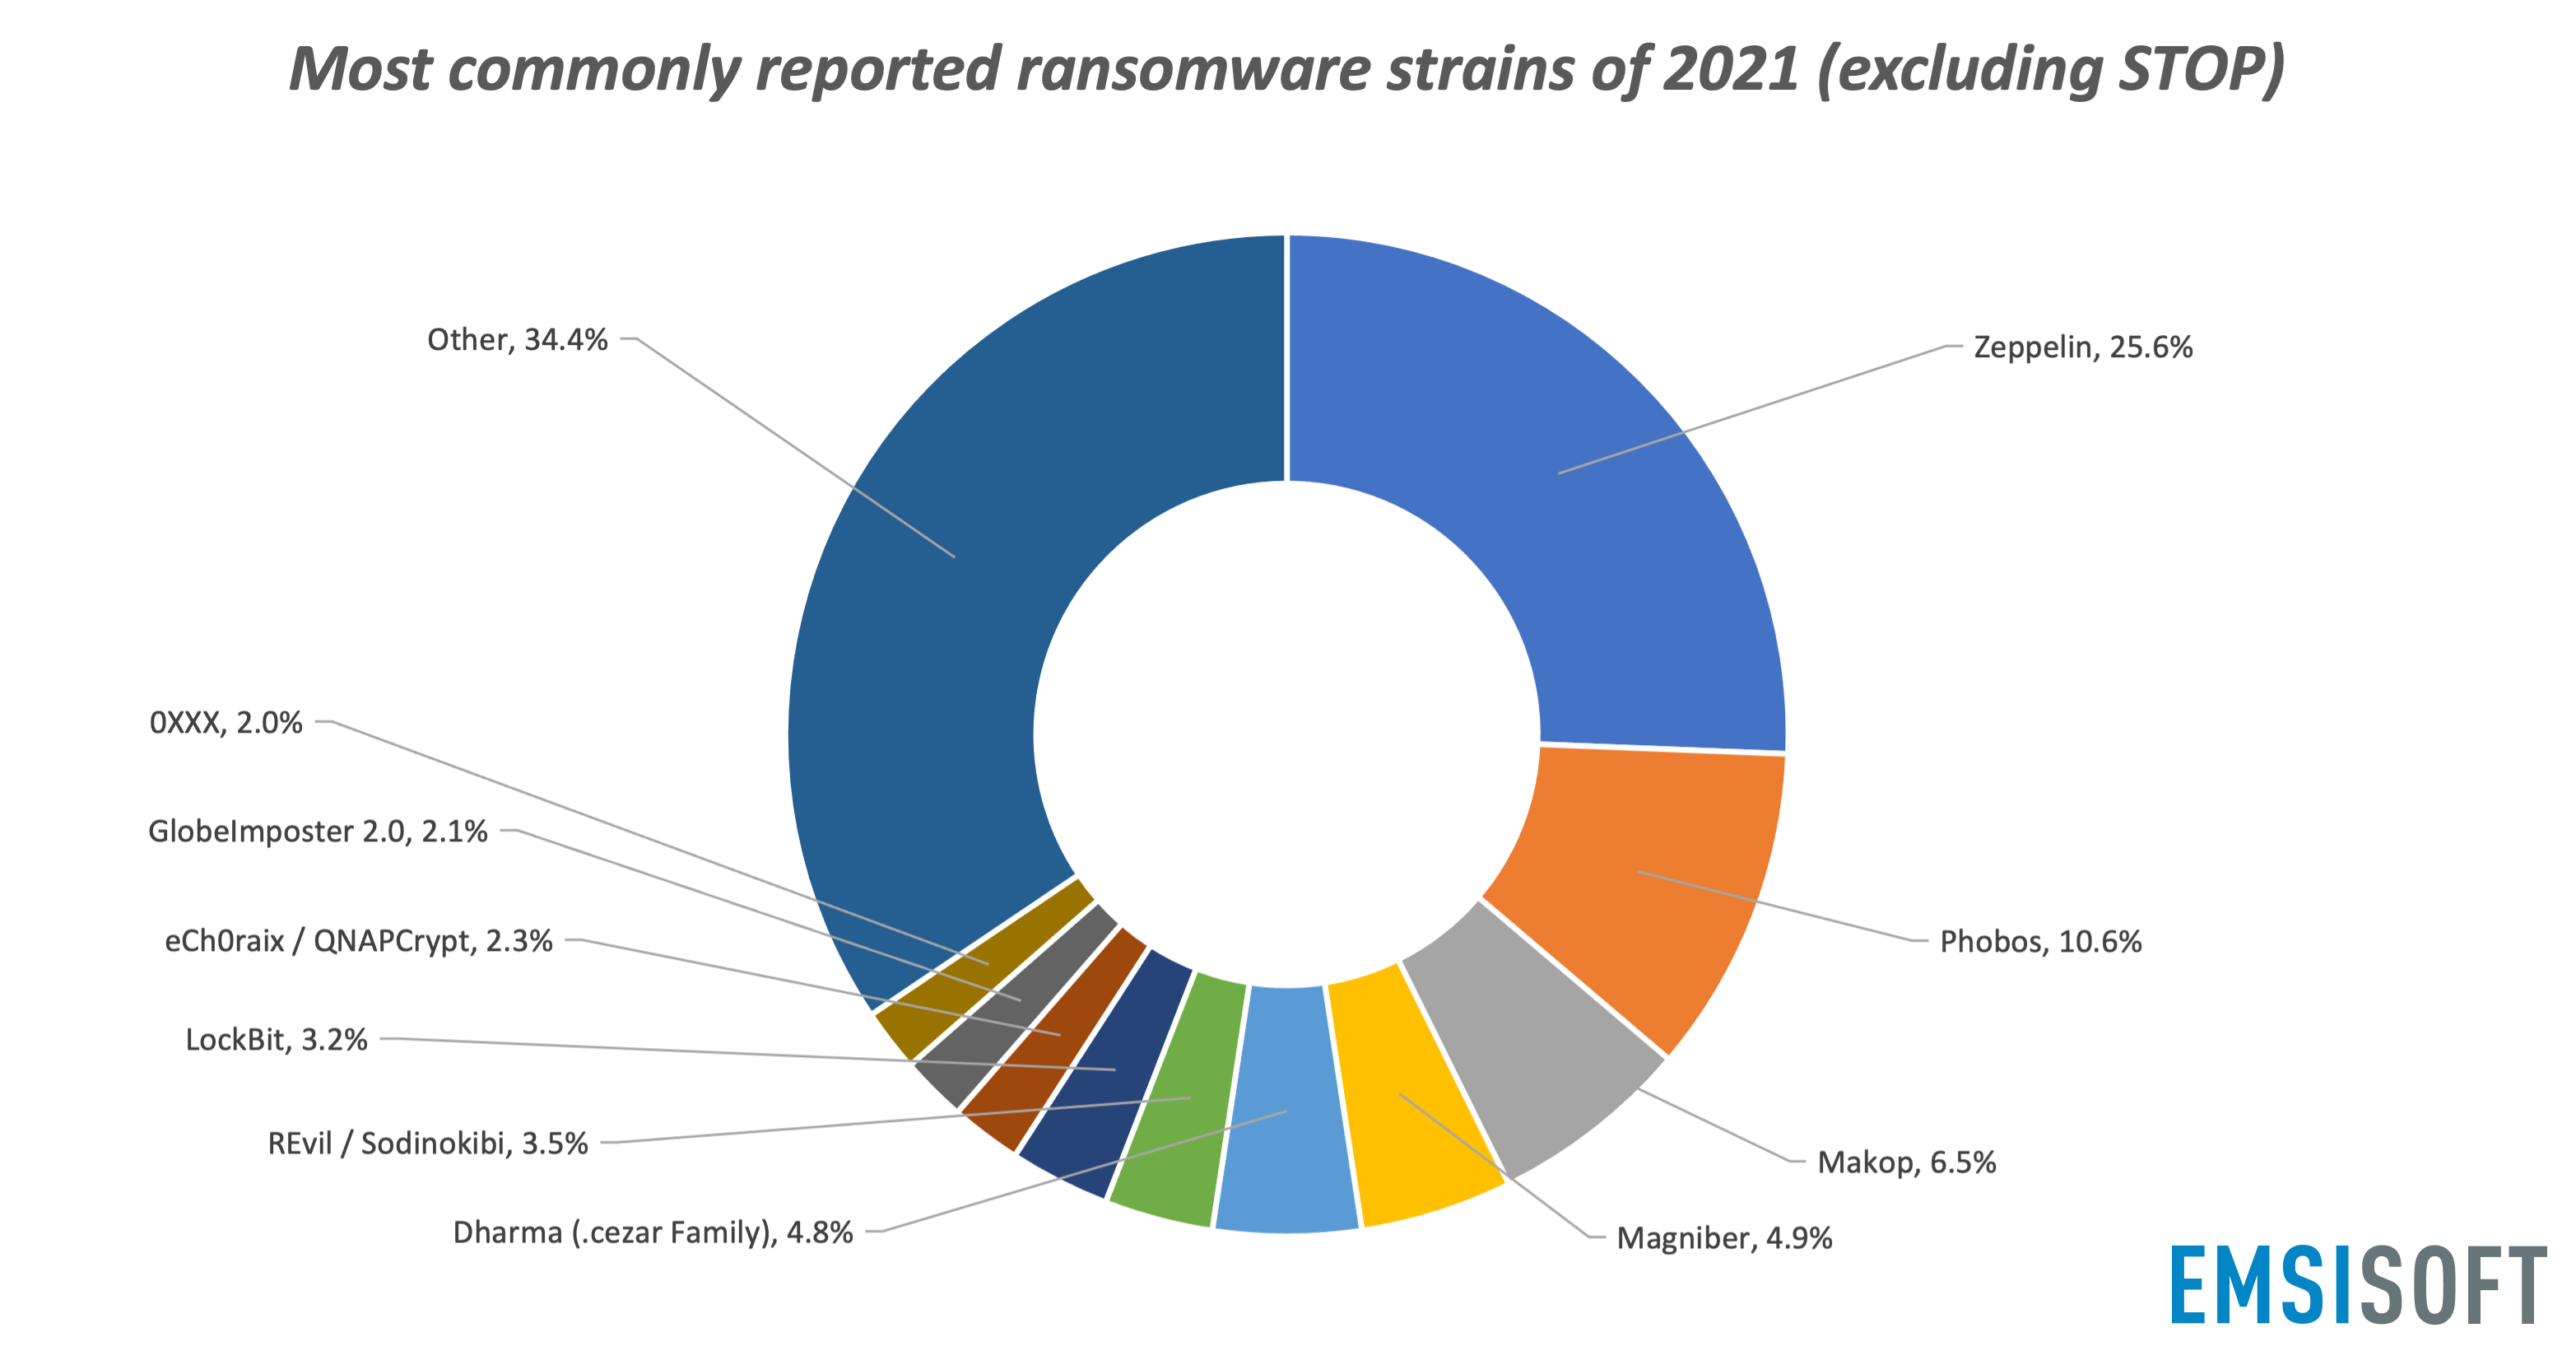 Most commonly reported ransomware strains of 2021 (excluding STOP)